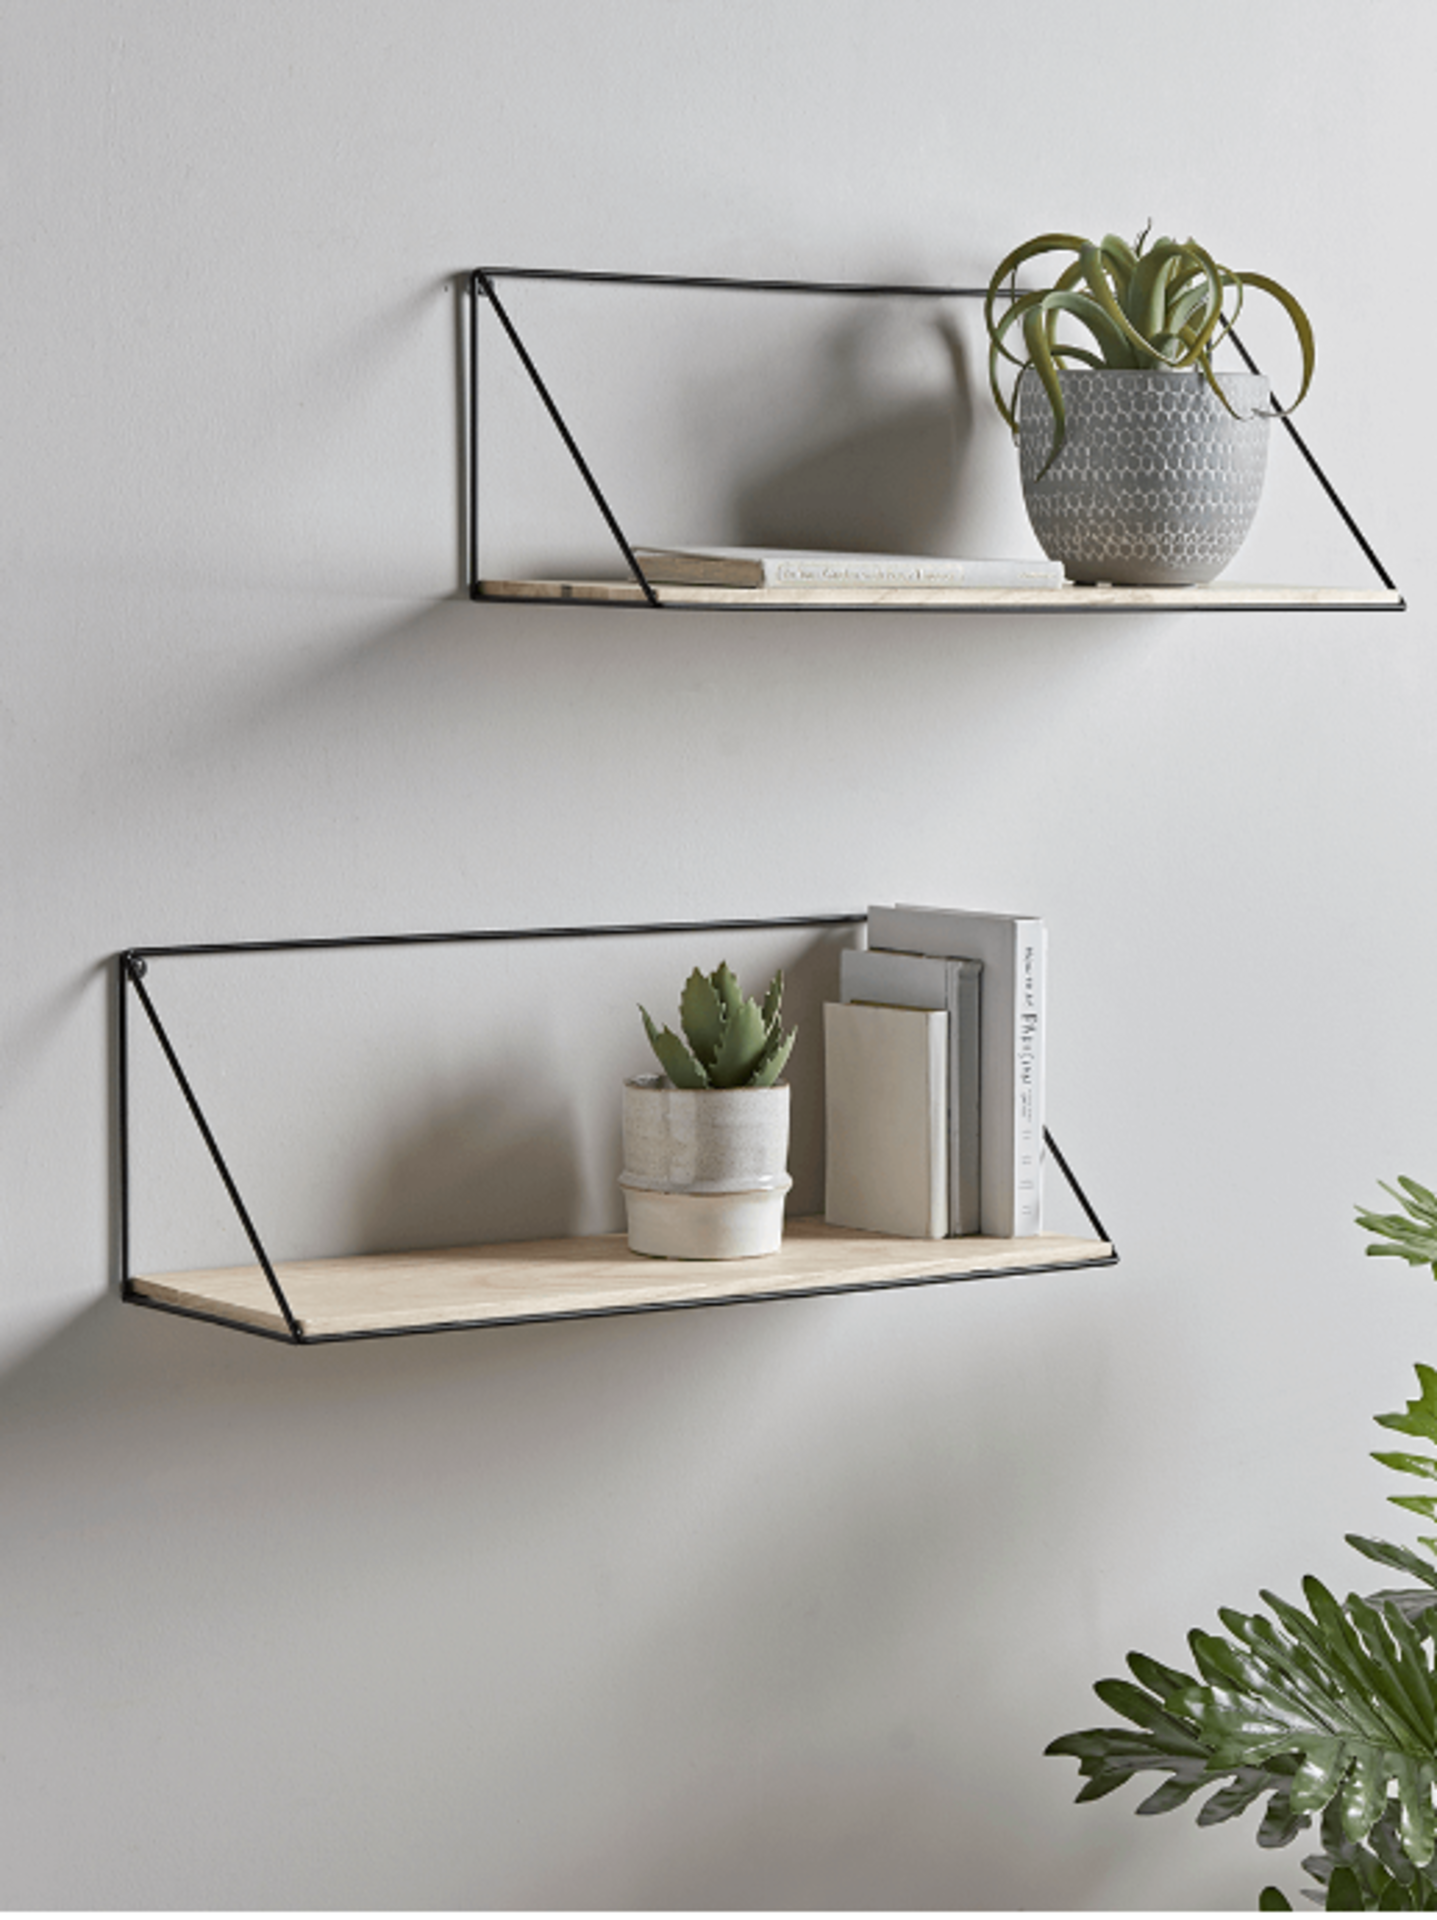 Two Industrial Wood & Metal Shelves - Large. RRP £135.00. Crafted from paulownia wood with a